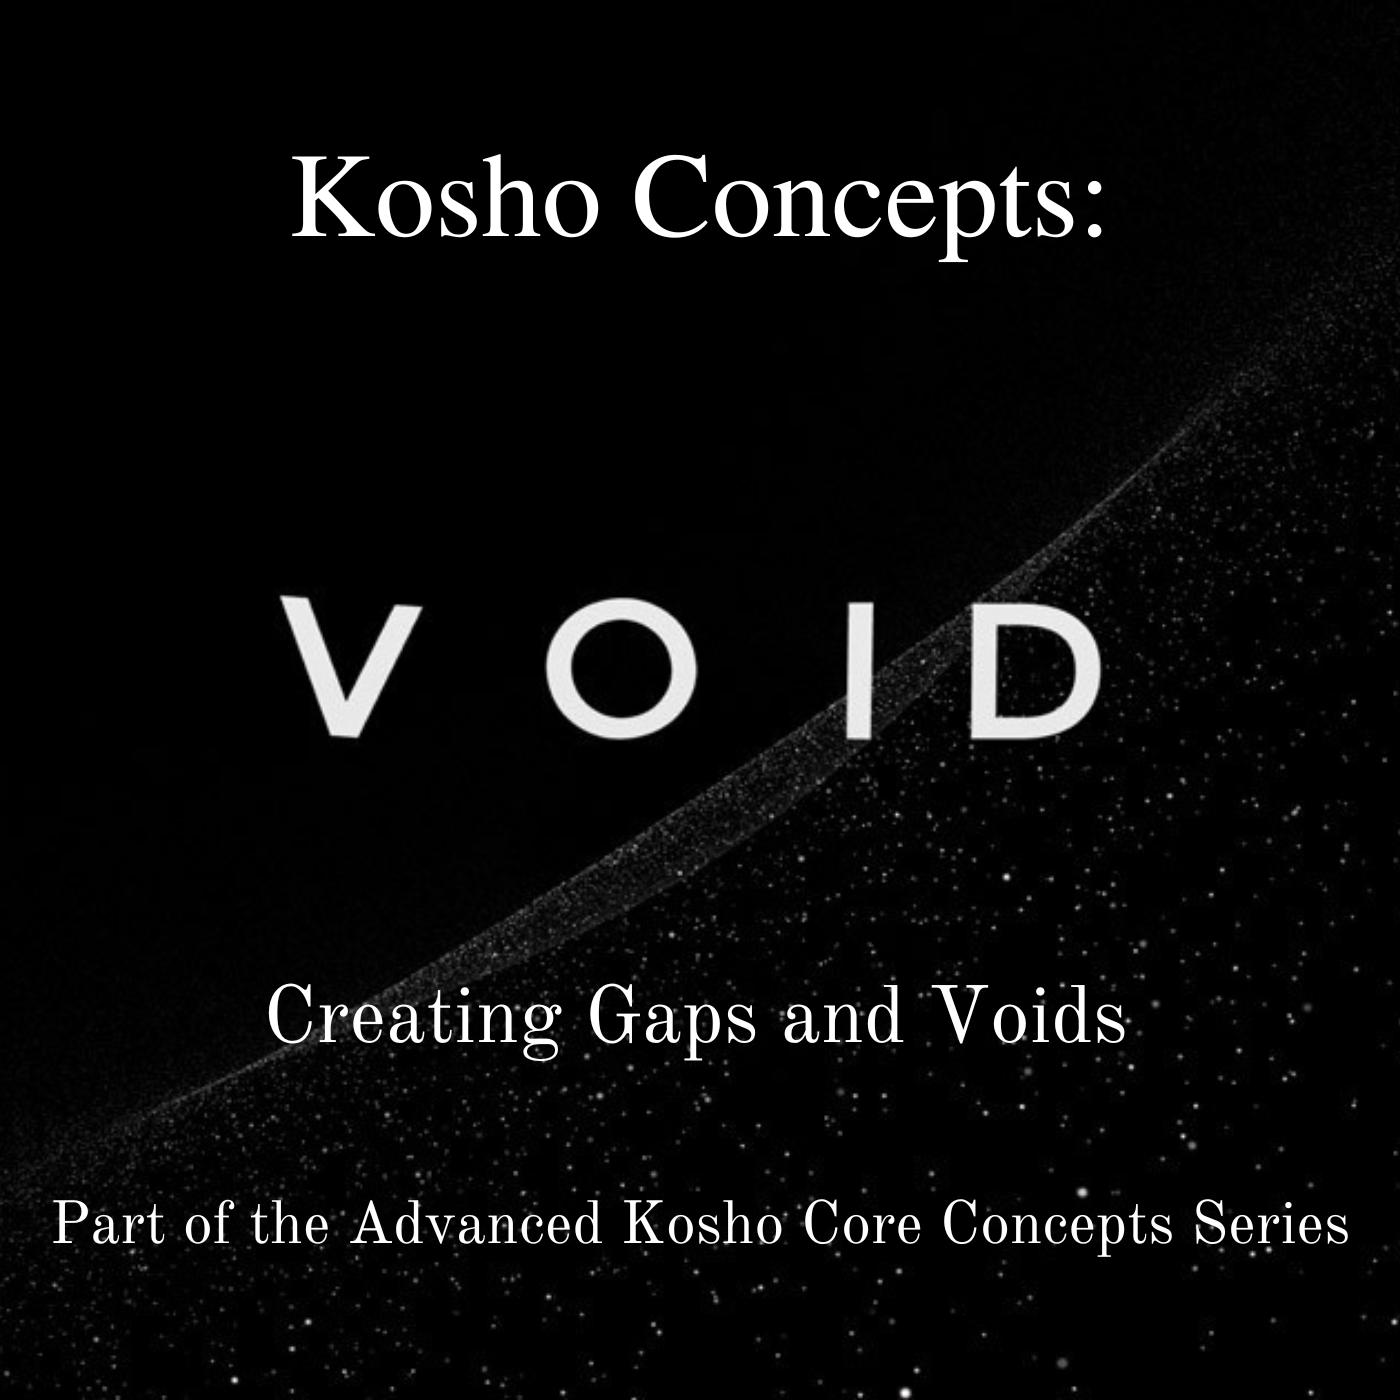 * Kosho Concepts: Creating Gaps and Voids